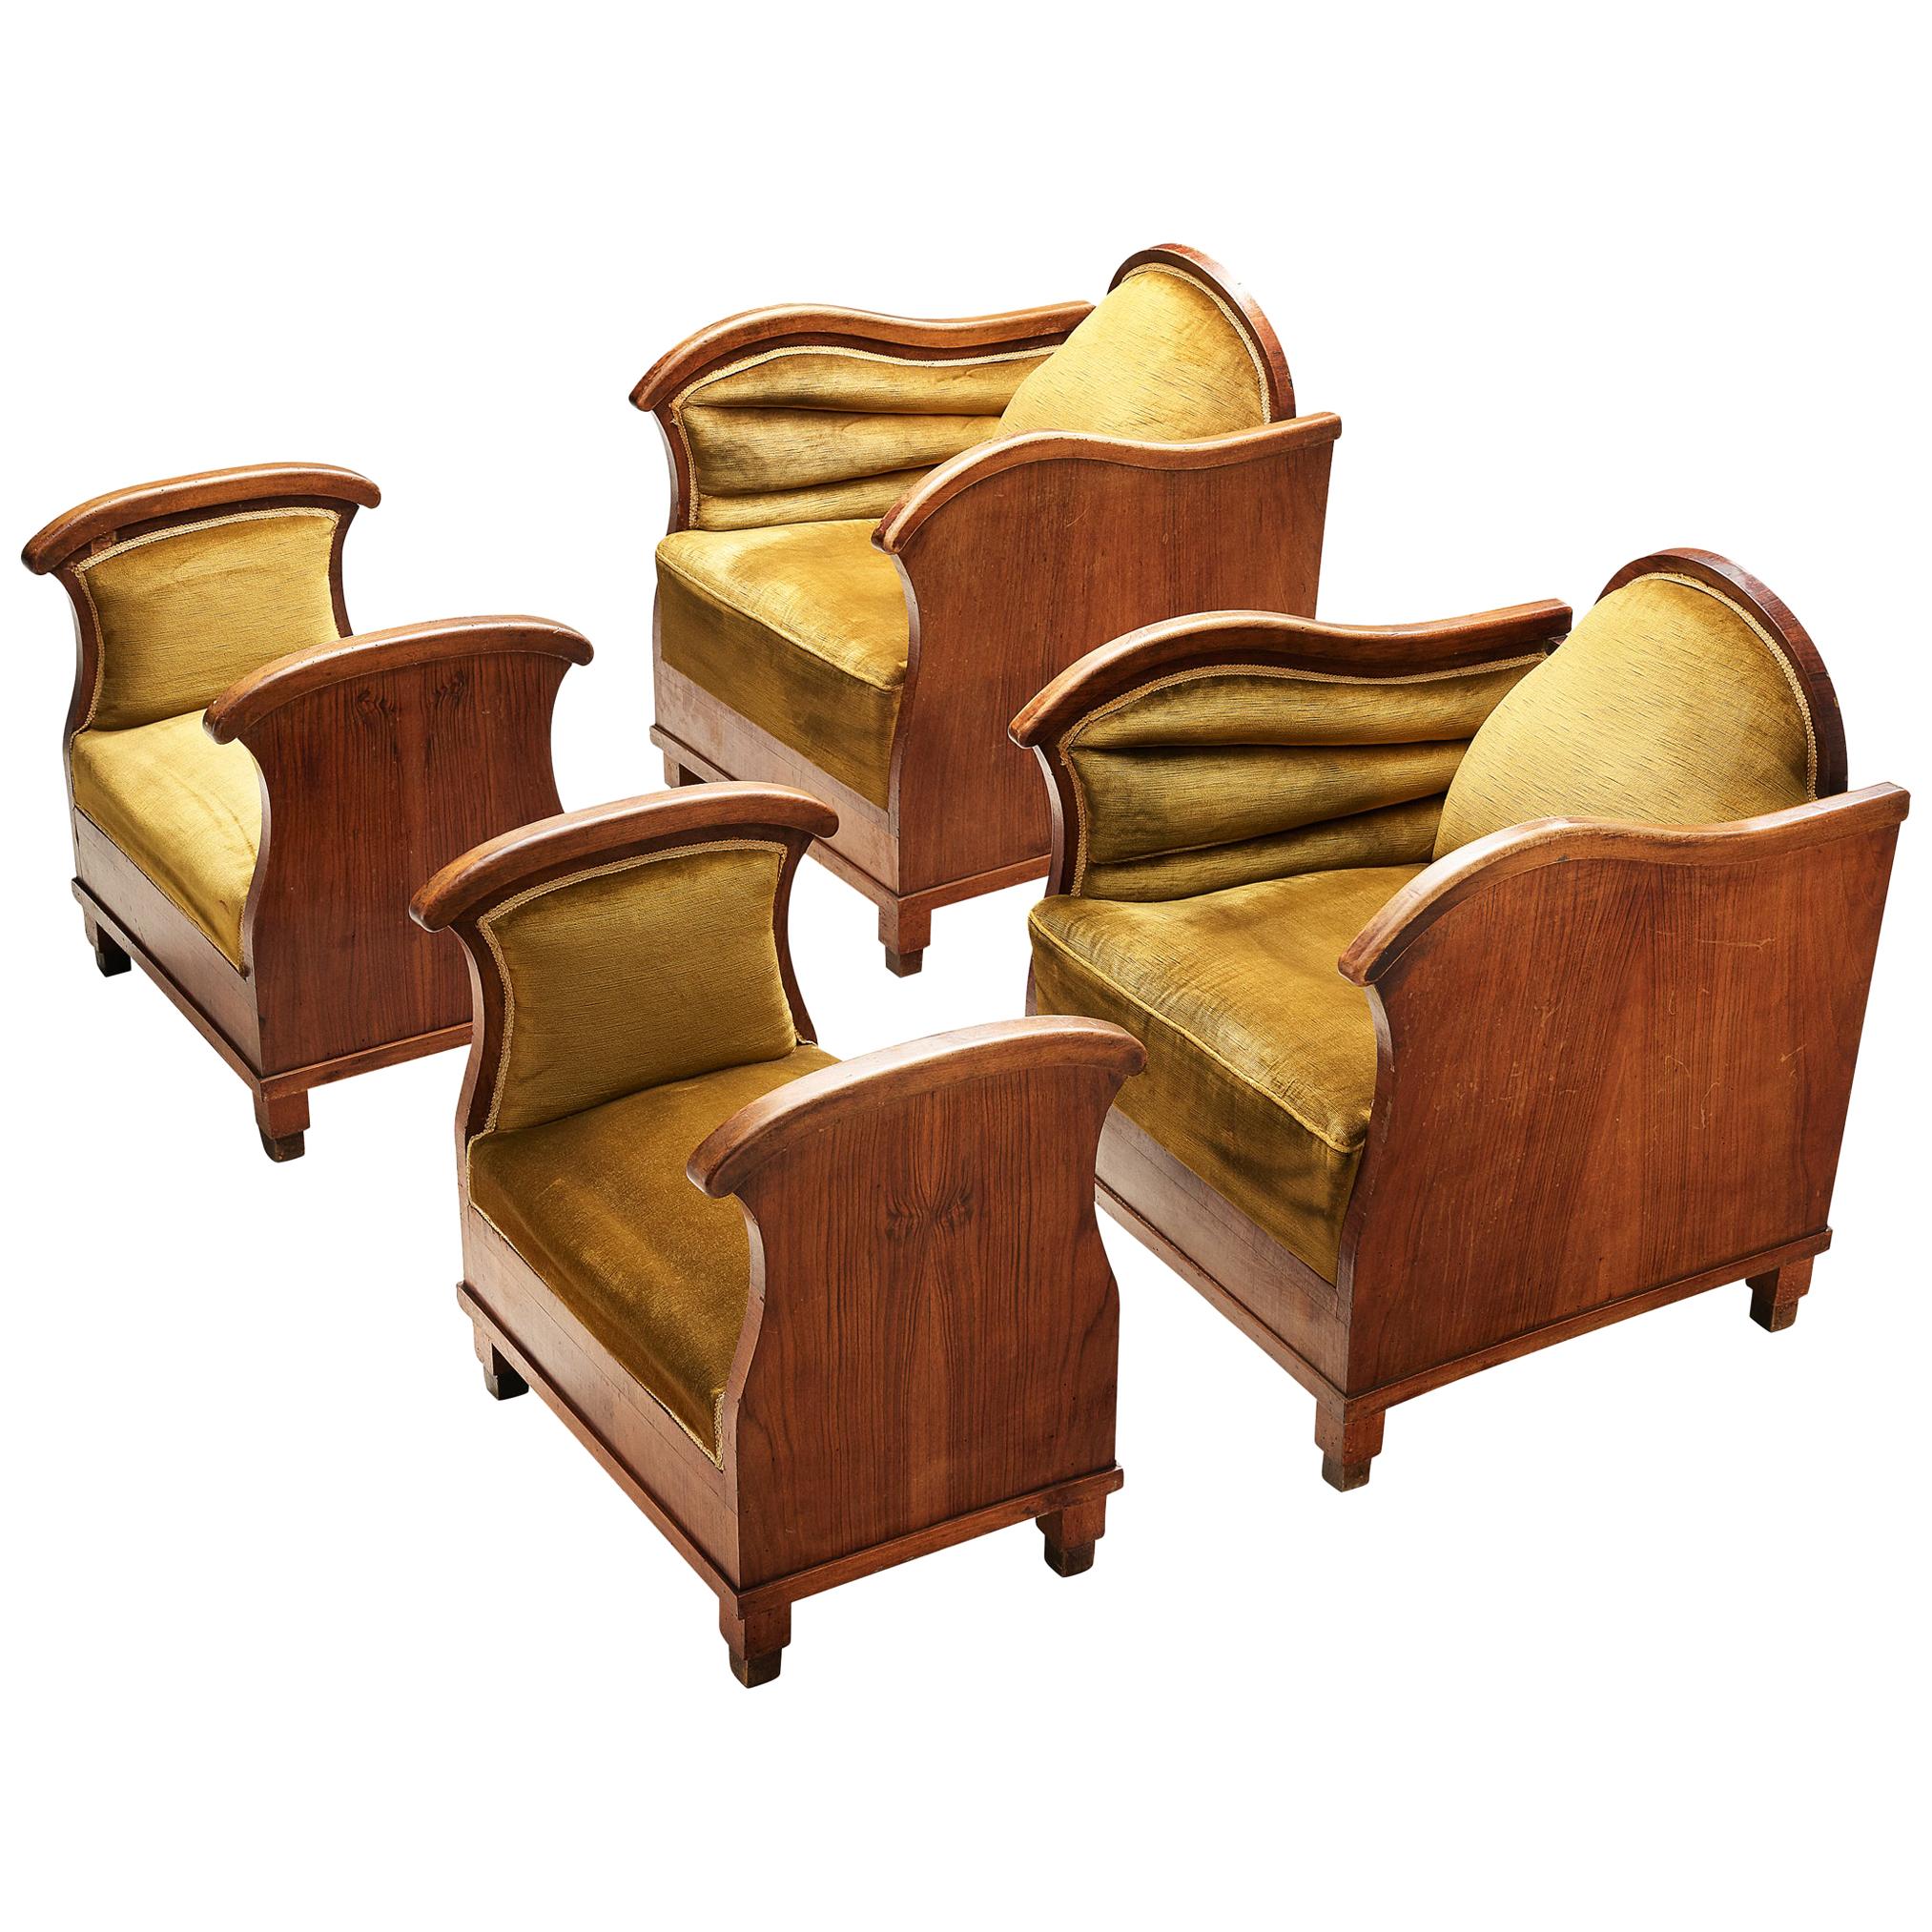 Pair of Art Deco Lounge Chairs